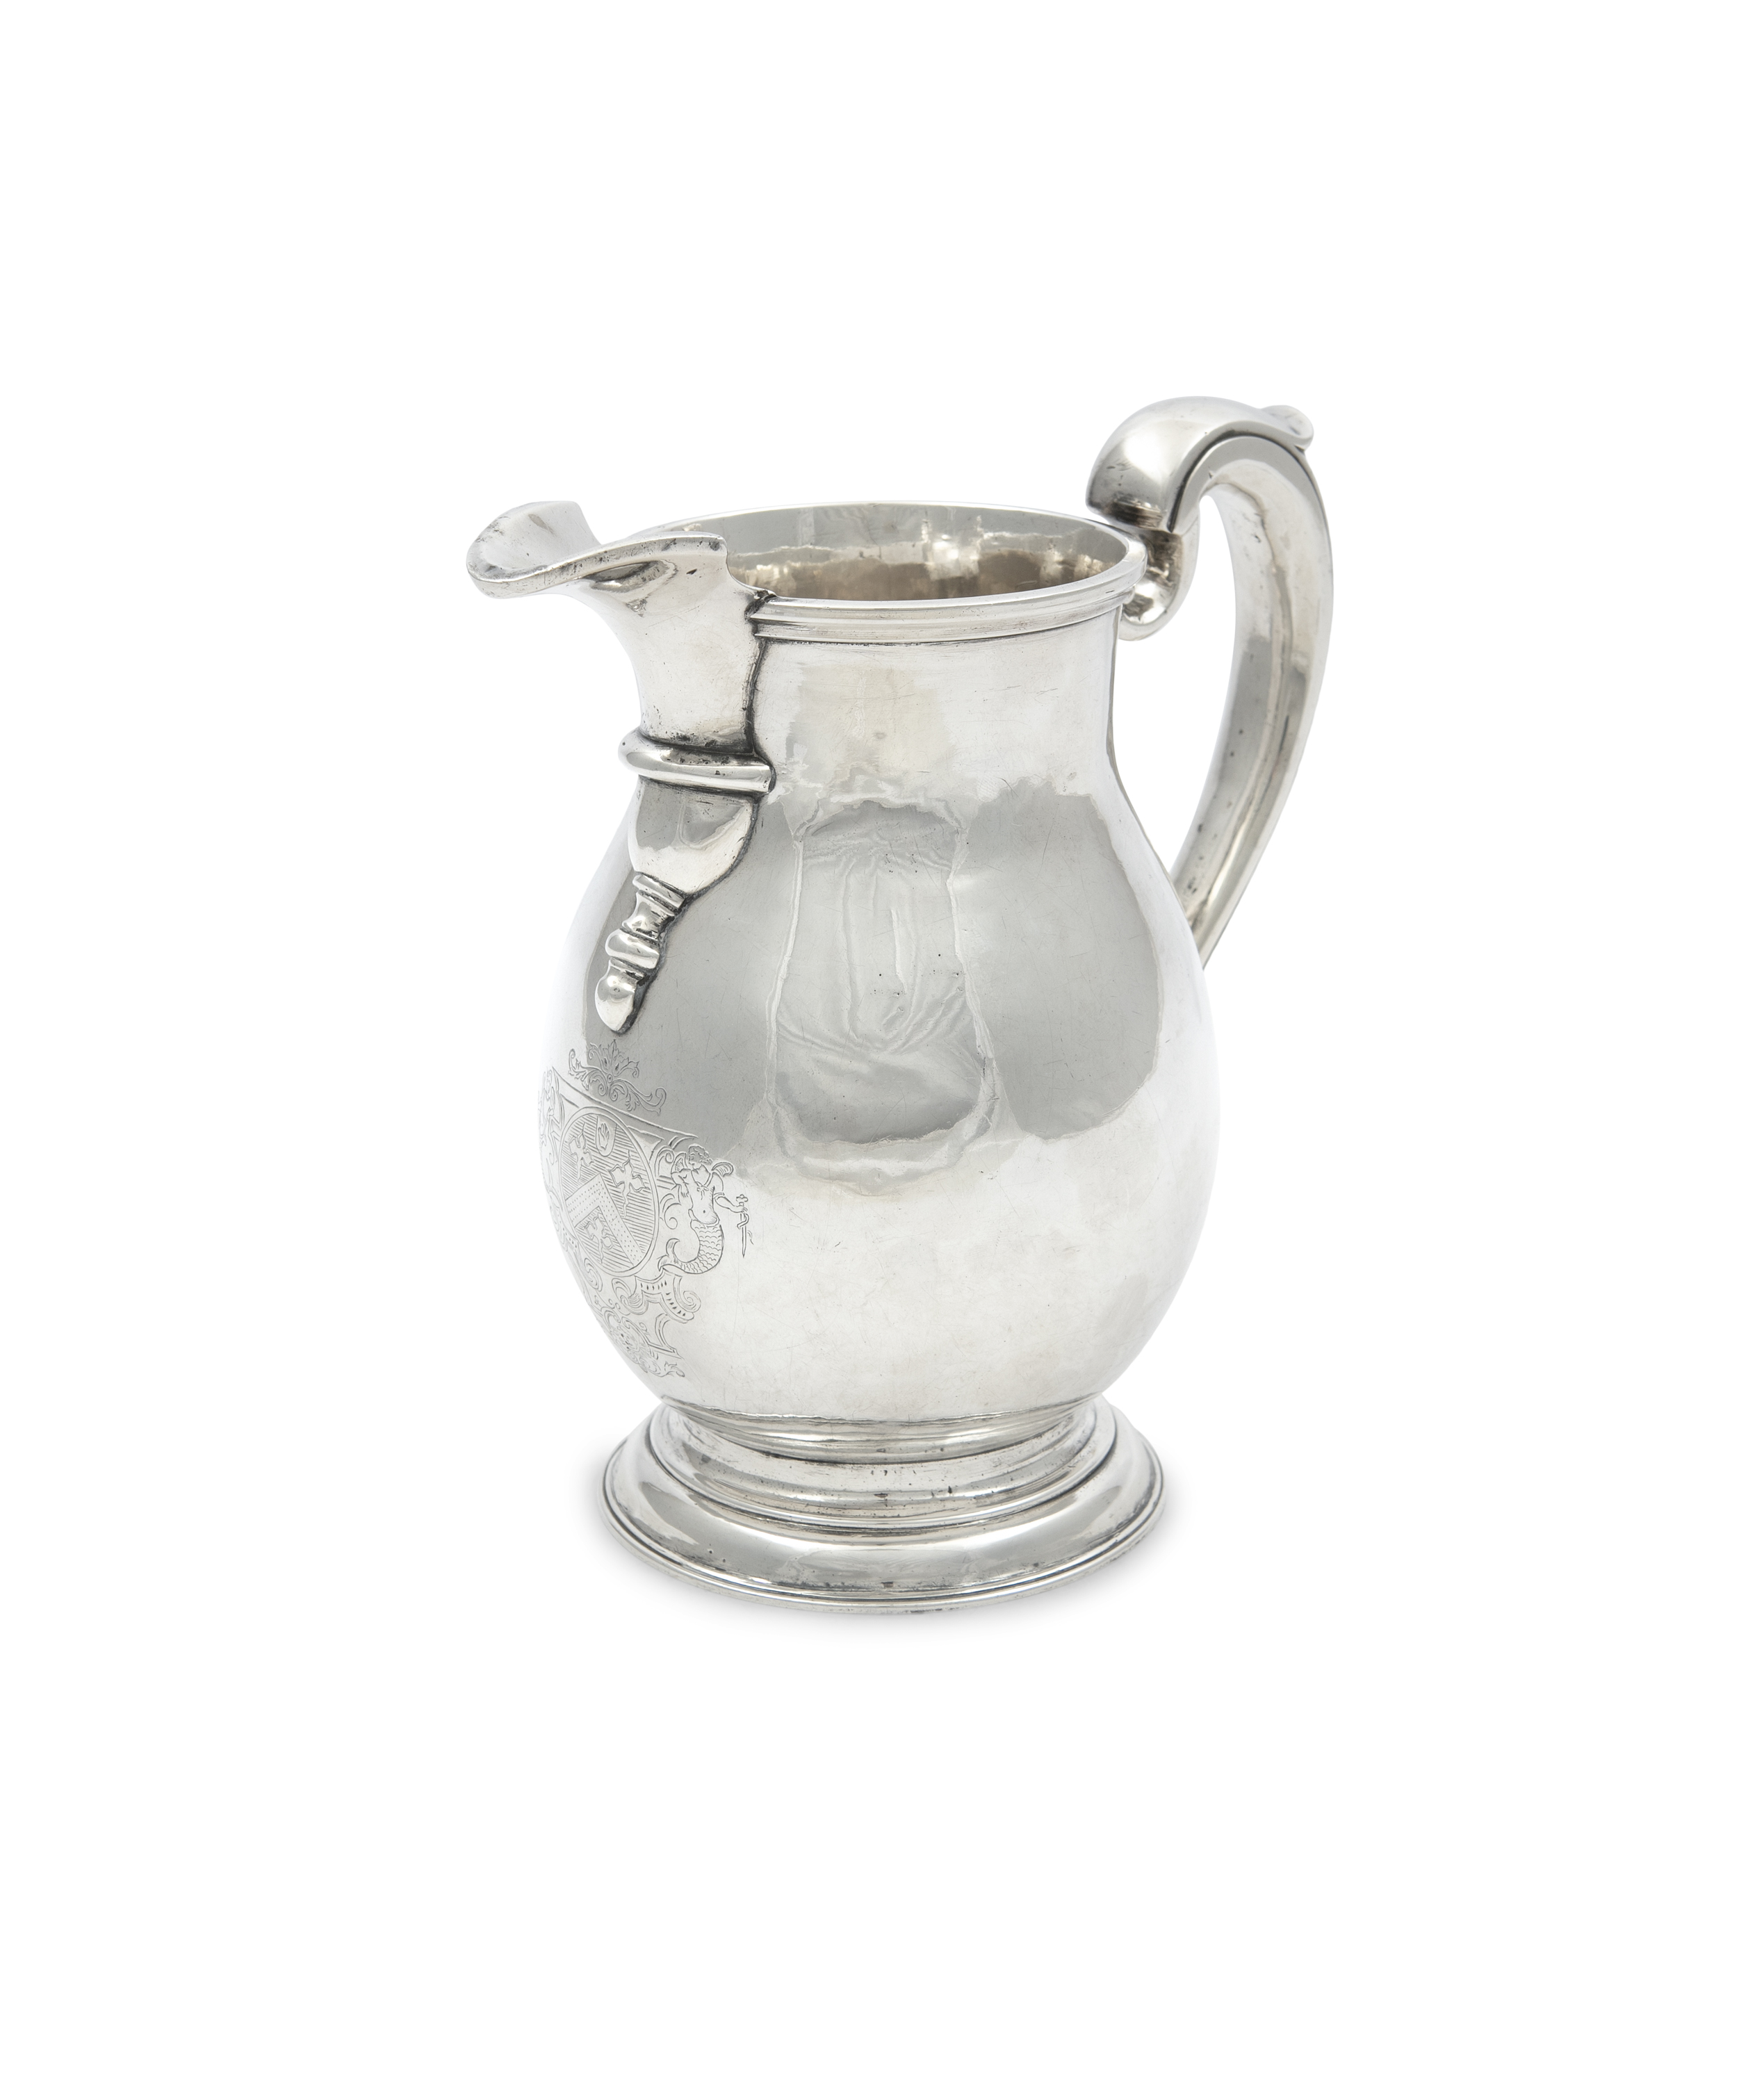 A RARE IRISH GEORGE I BEER JUG, by Alexander Sinclair, Dublin 1715, of baluster form, the plain body